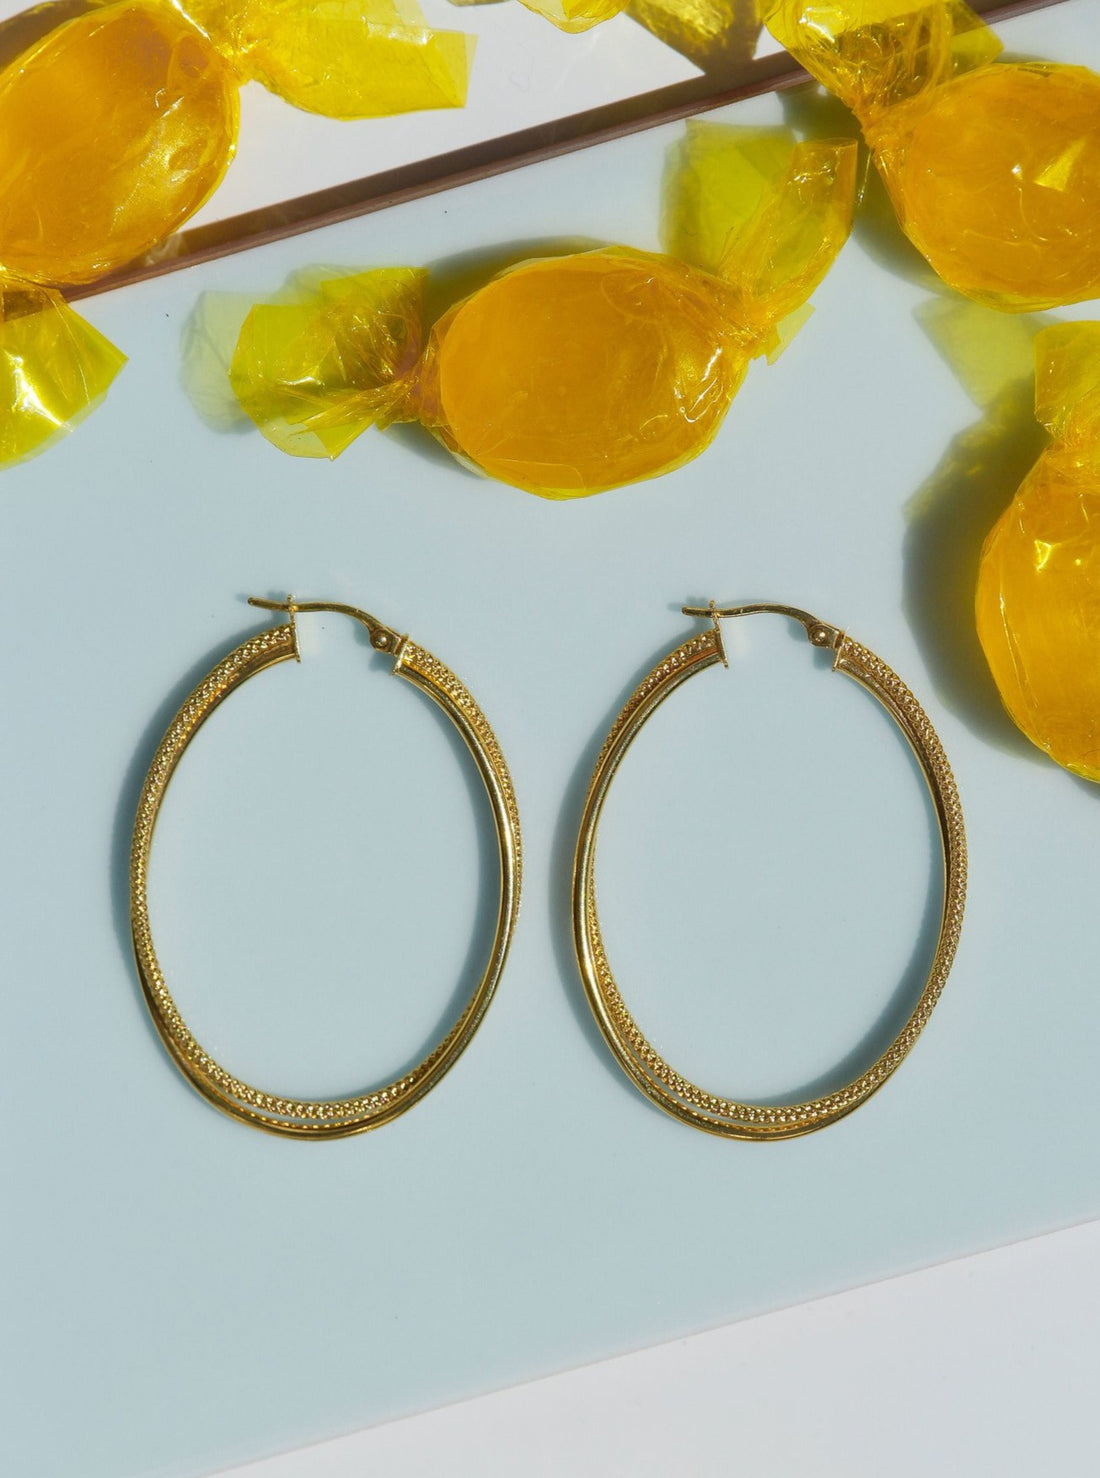 Large Oval Gold Hoops, 10k oval hoops, textured gold oval hoops, gold oval hoops canada, 10k hoops